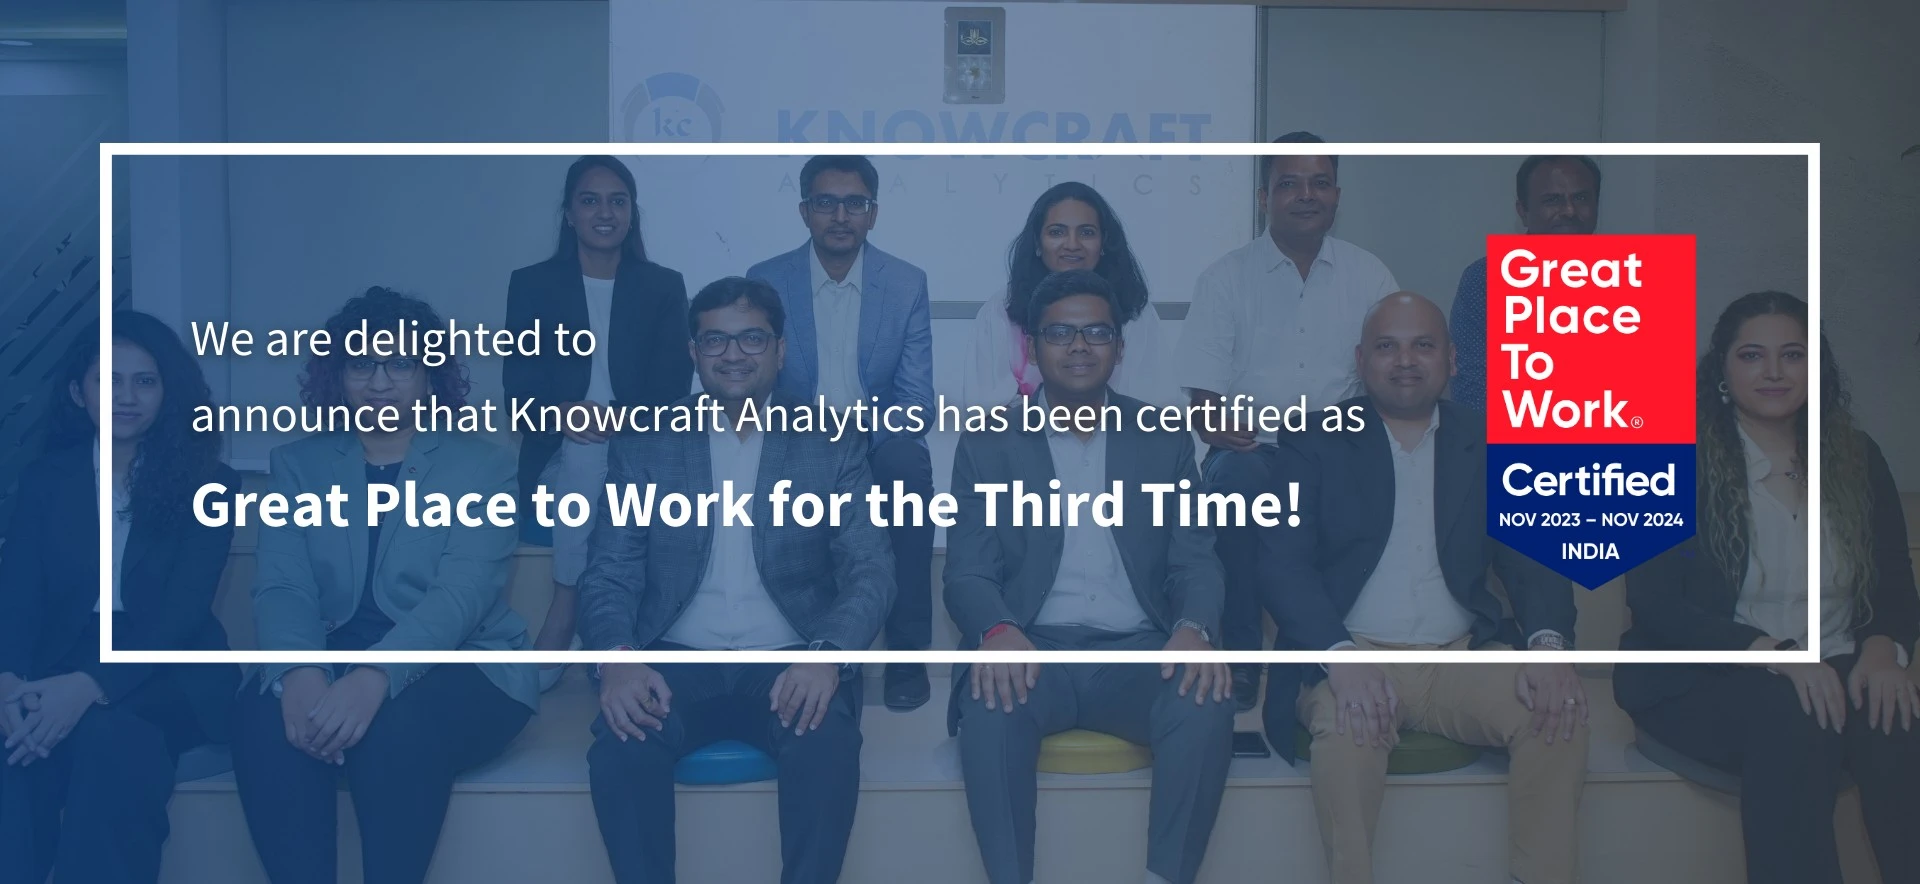 Knowcraft Analytics: A hub of innovation and collaboration, fostering professional growth in an inclusive workplace